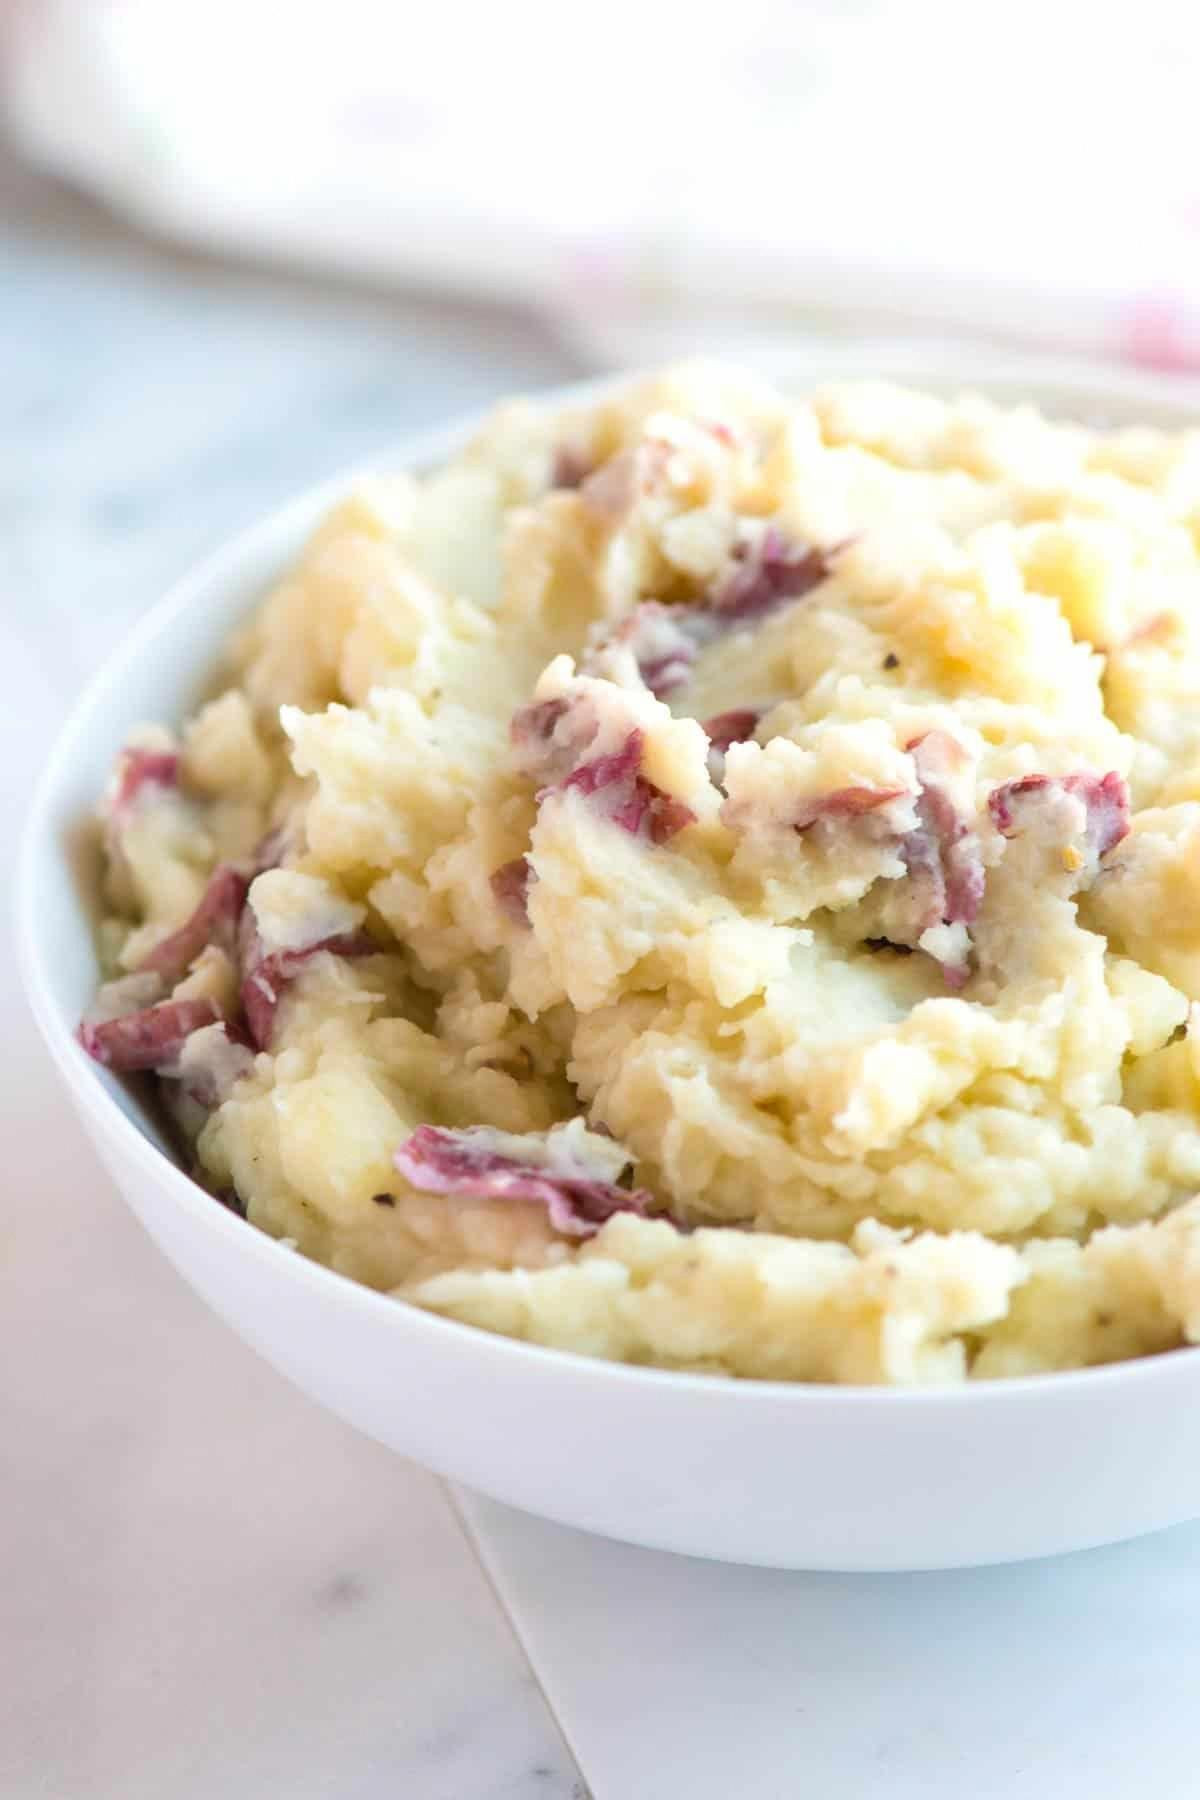 Gourmet Mashed Potatoes Recipes
 Affordable Gourmet & EASY Family Dinners Recipes in 2020